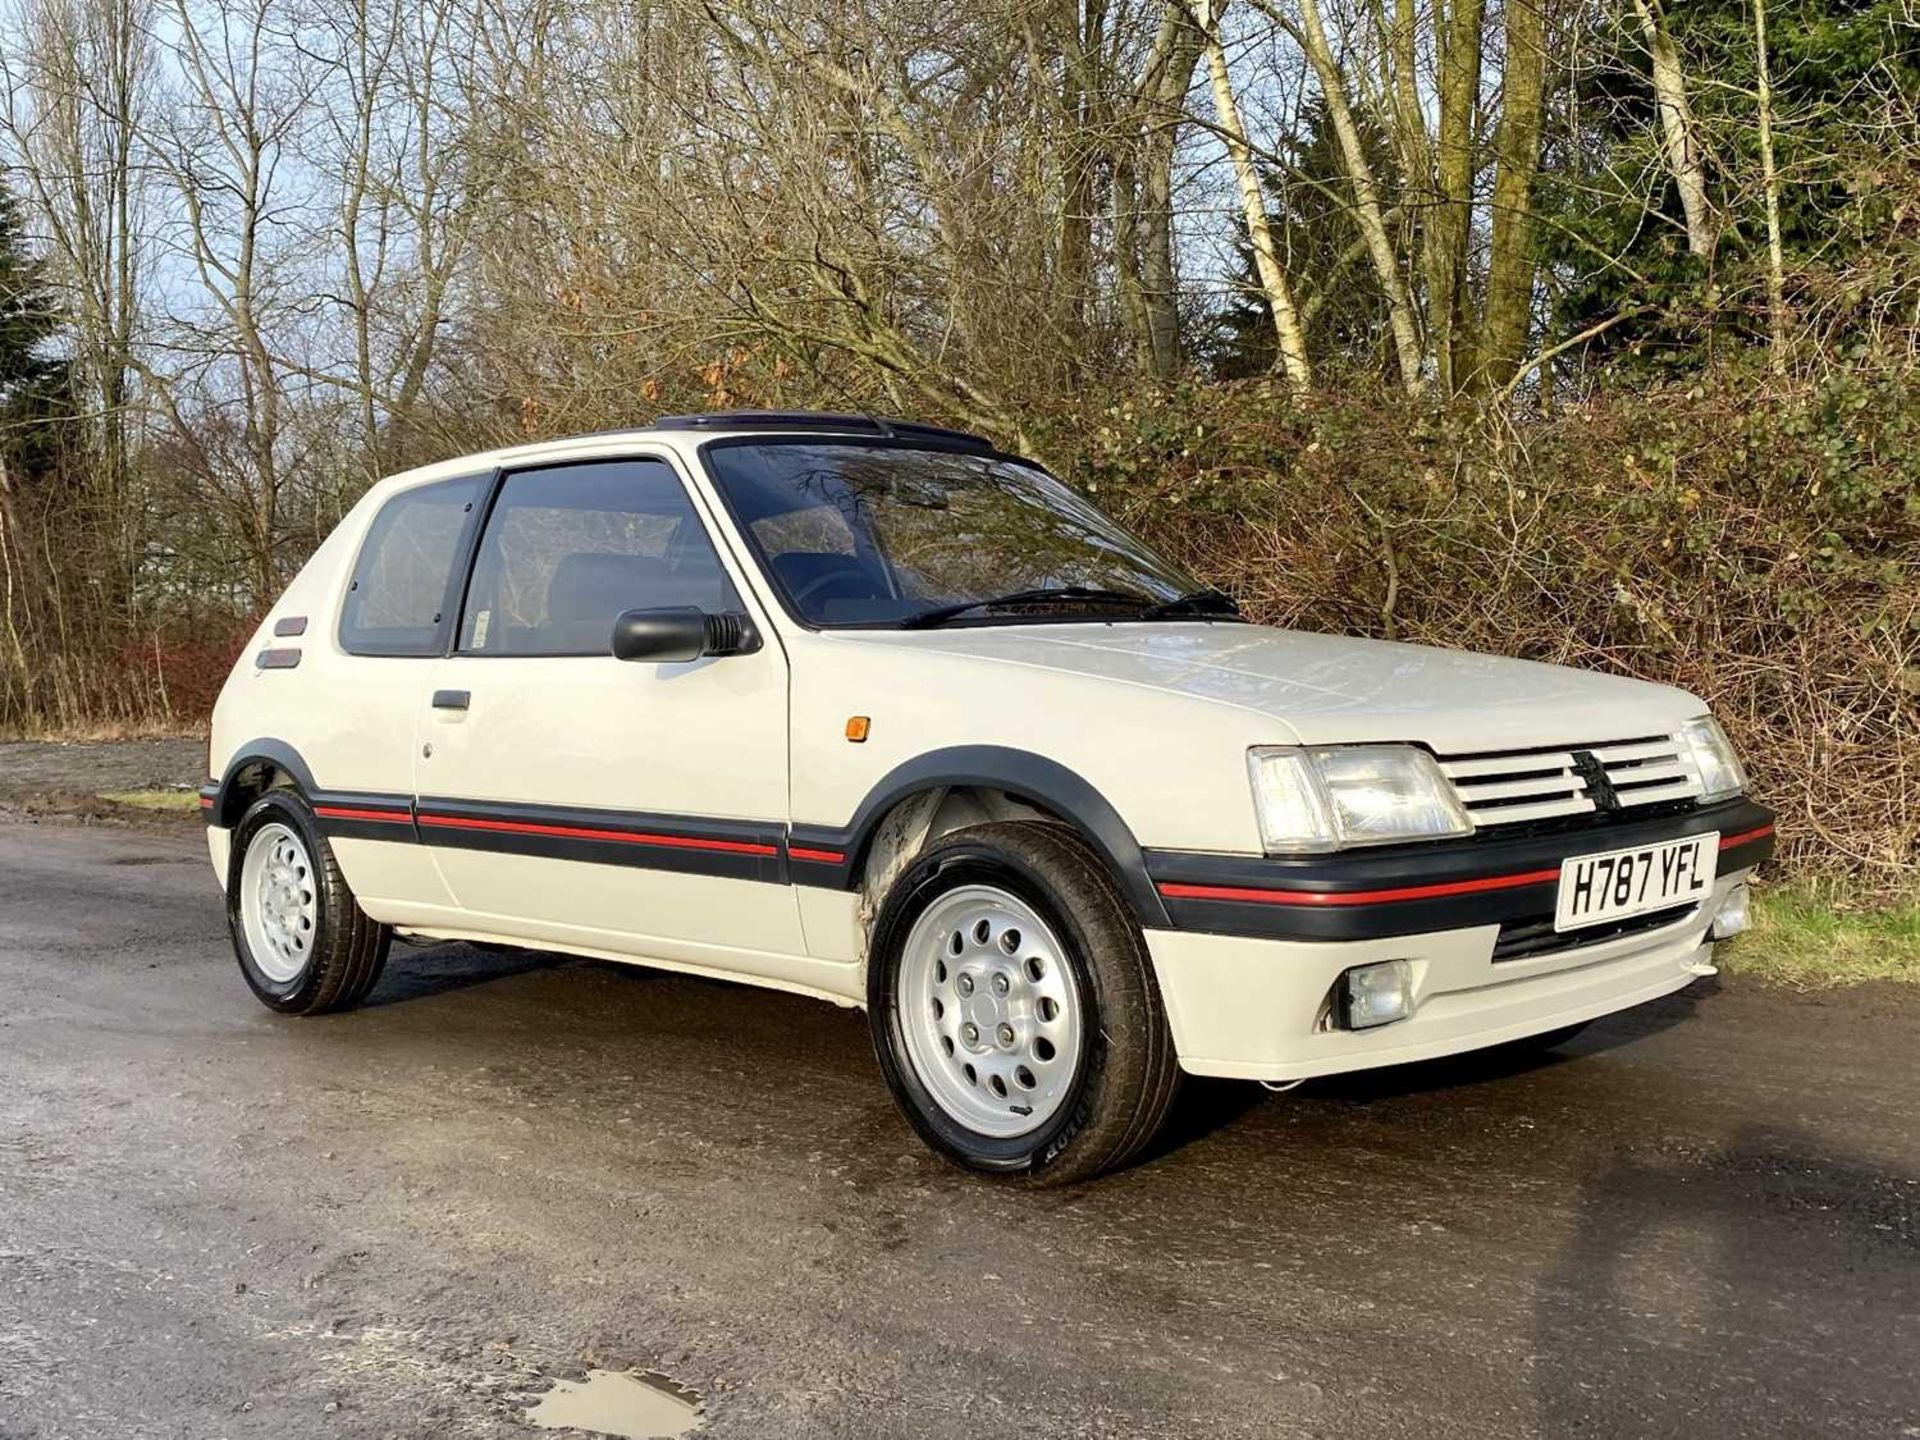 1990 Peugeot 205 GTi 1.6 Only 56,000 miles, same owner for 16 years - Image 3 of 81